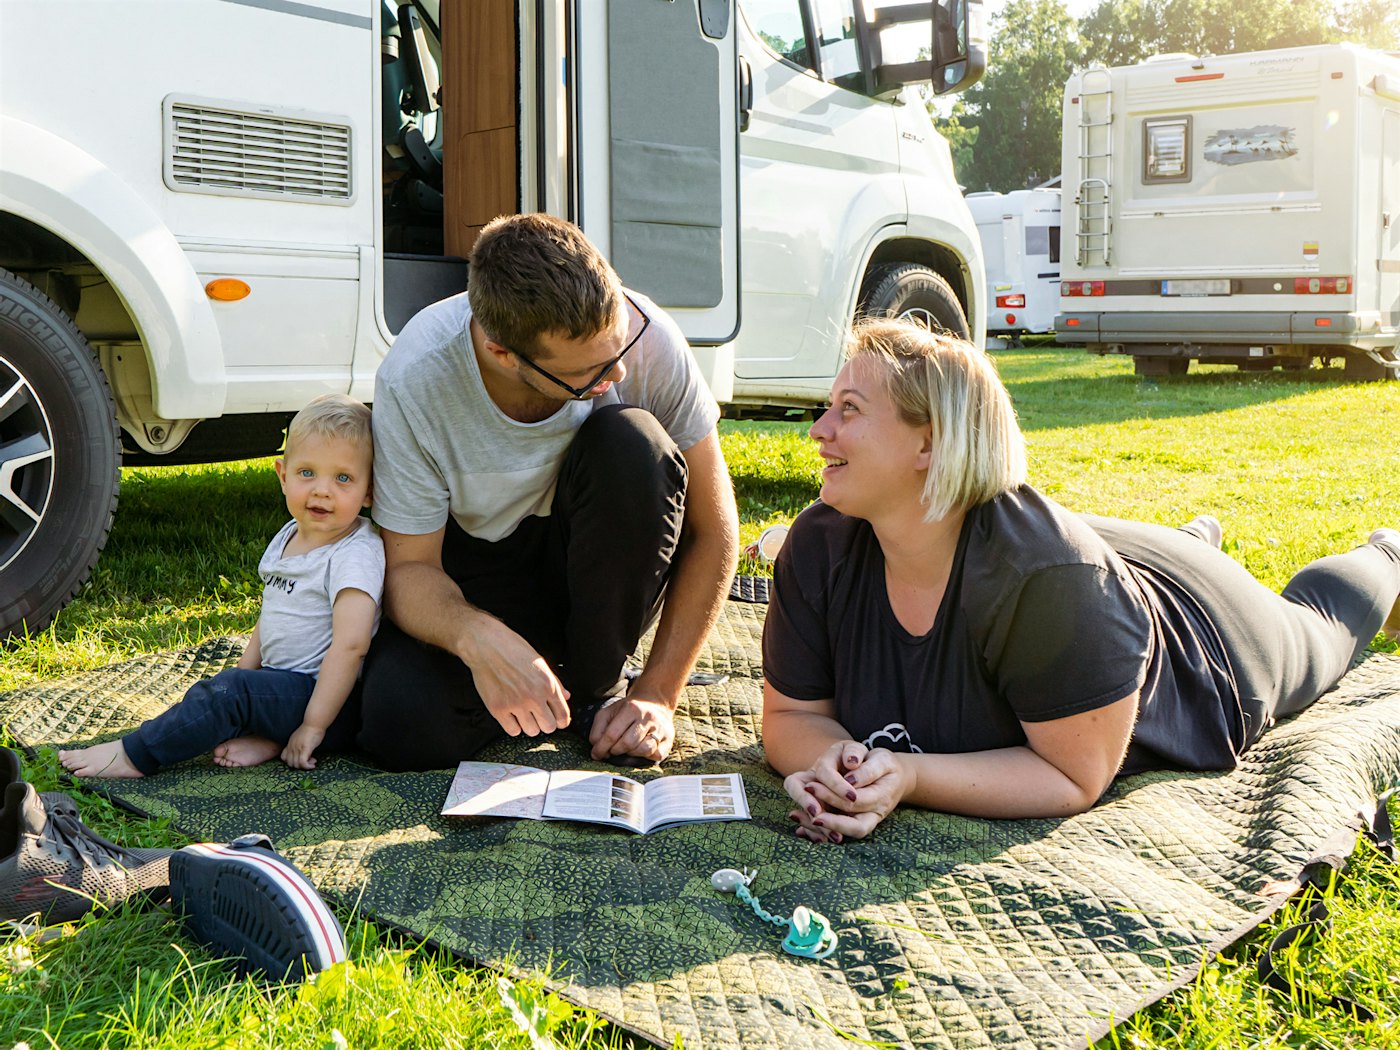 Family sits on carpet outside motorhome, looks at map and each other, and smiles. Photo